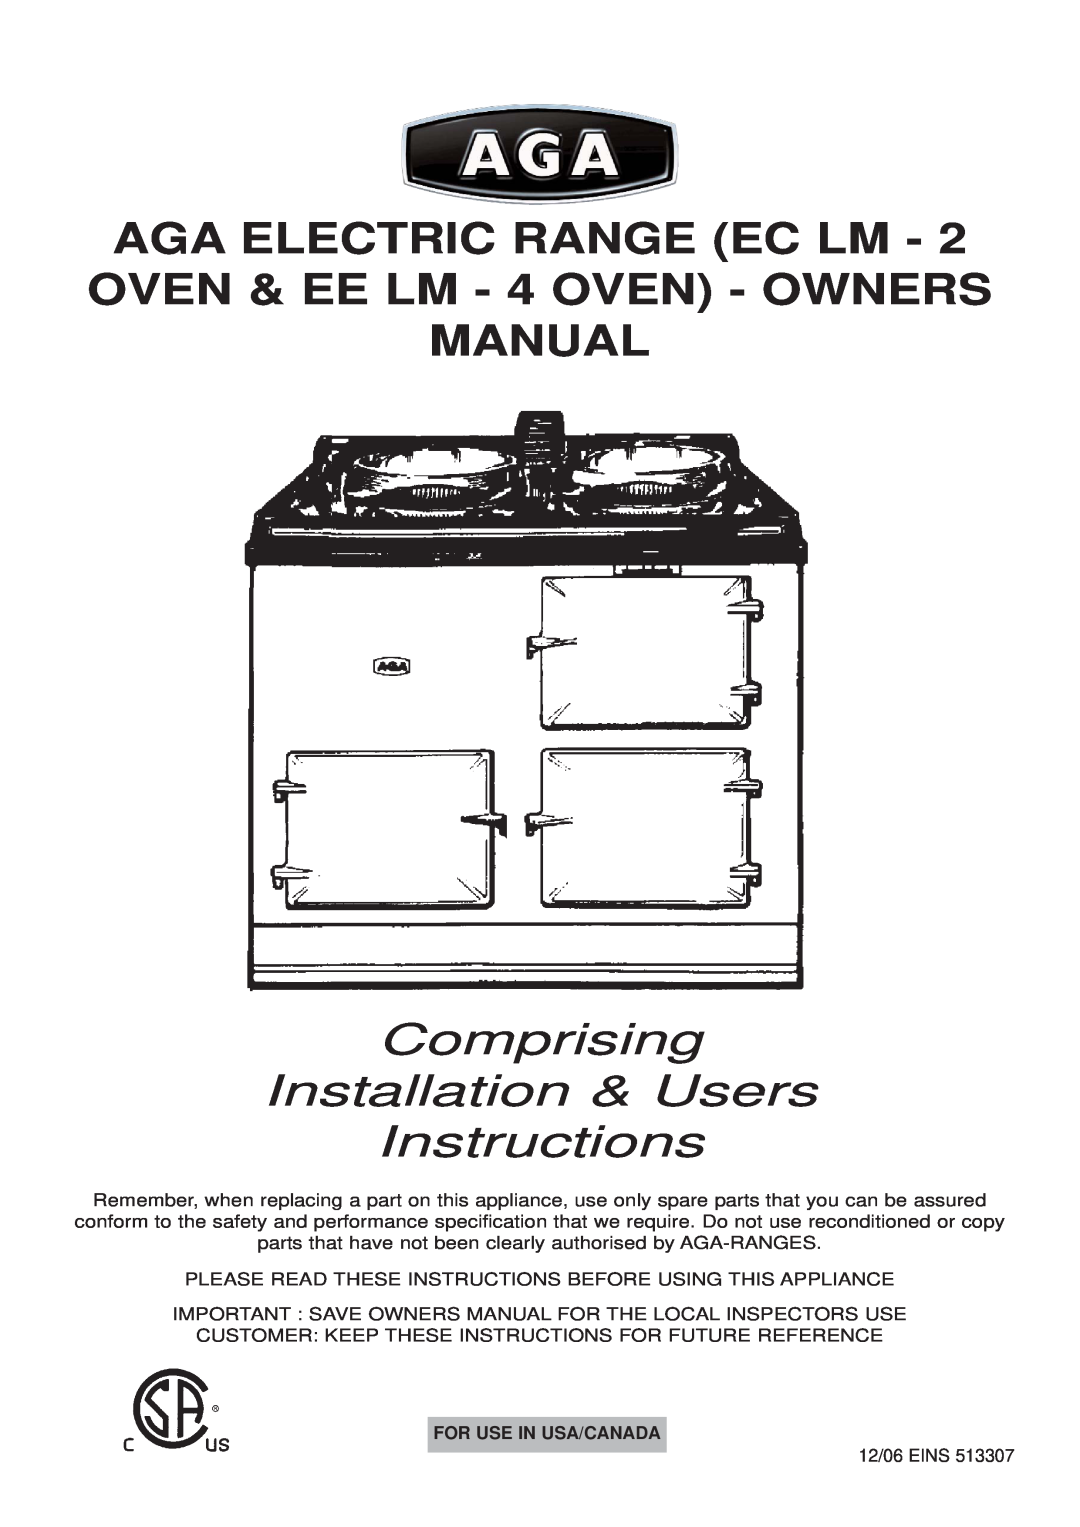 Aga Ranges EC LM-2, EE LM-4 owner manual Comprising Installation & Users Instructions, For Use In Usa/Canada 